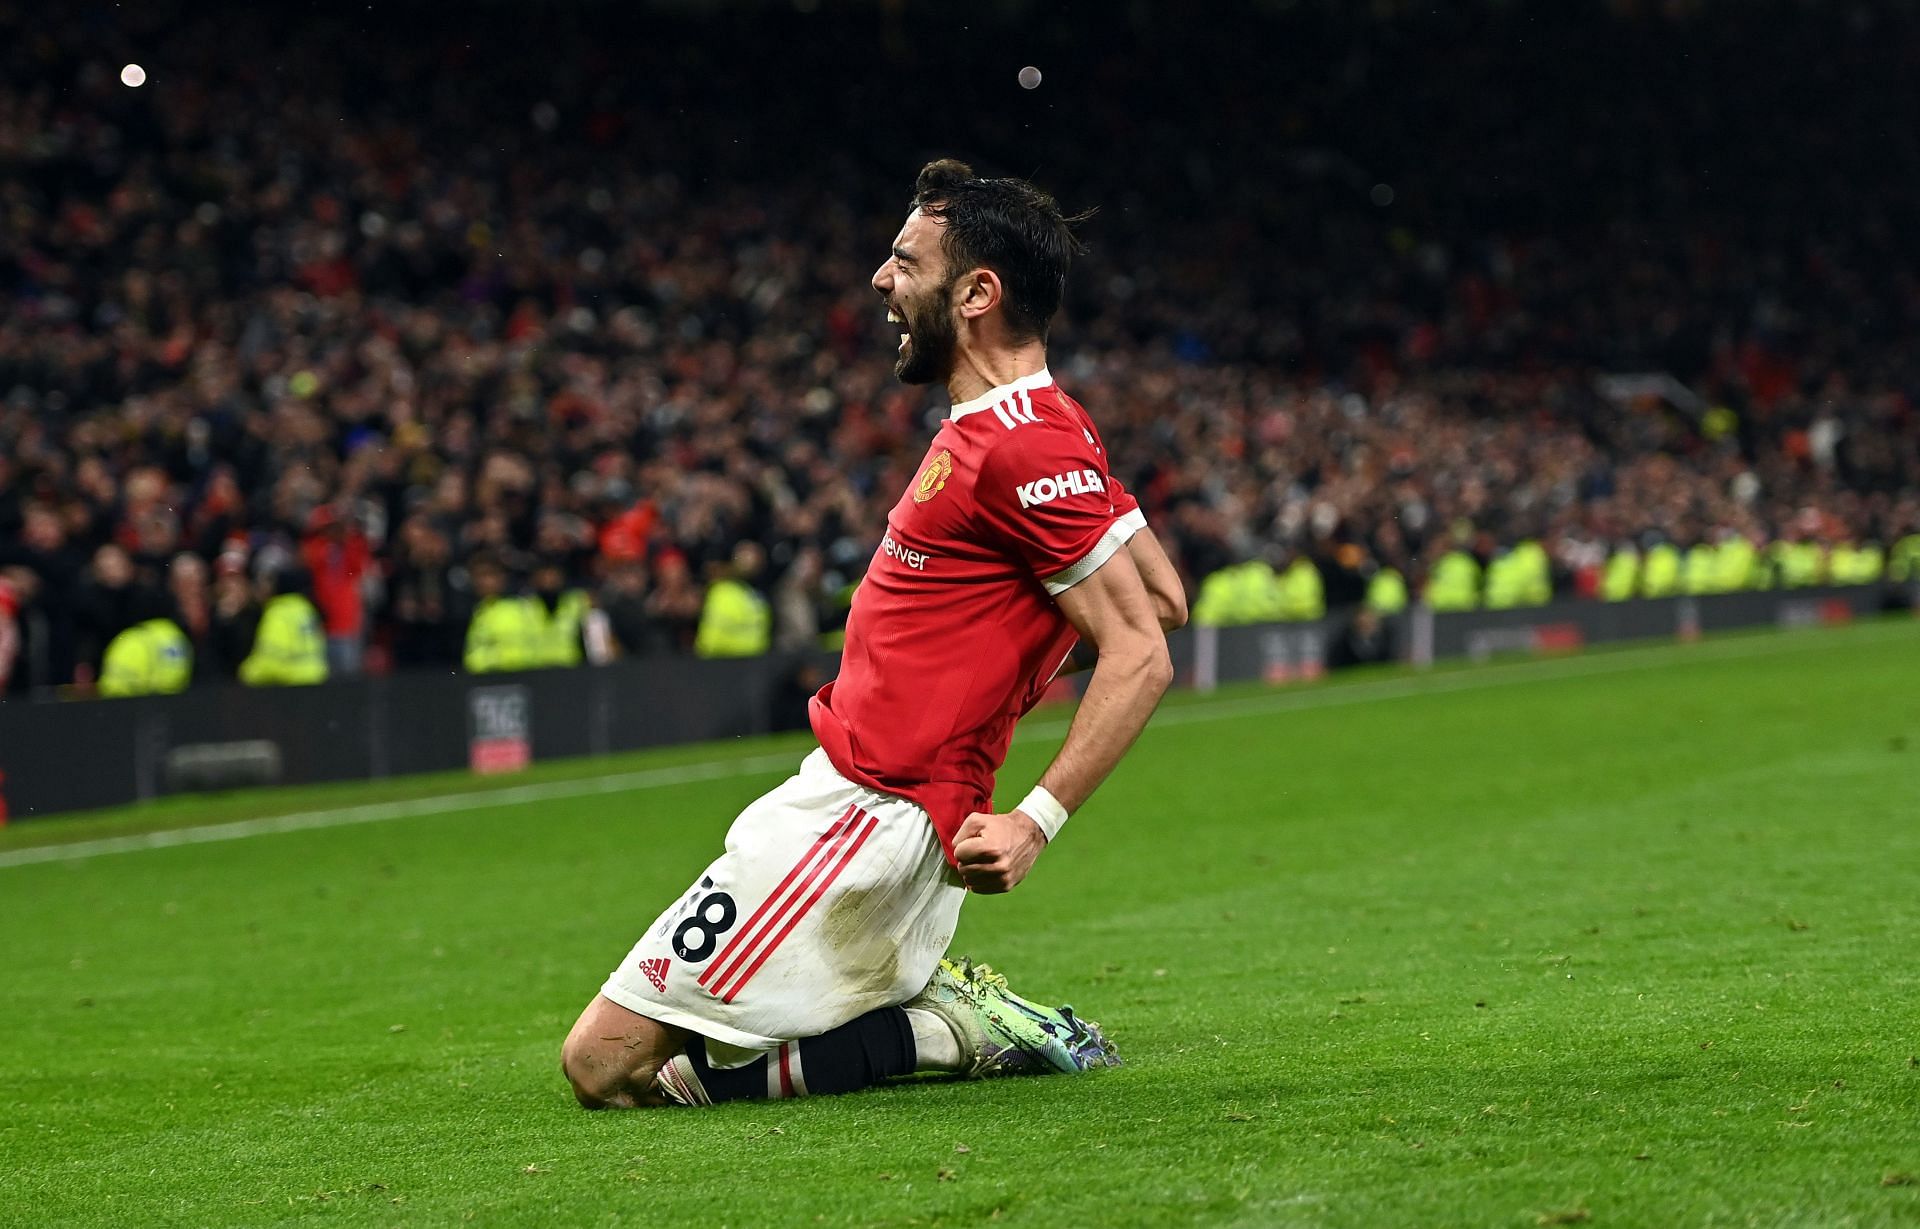 Bruno Fernandes ran the show from midfield for the Red Devils and bagged a well-deserved goal